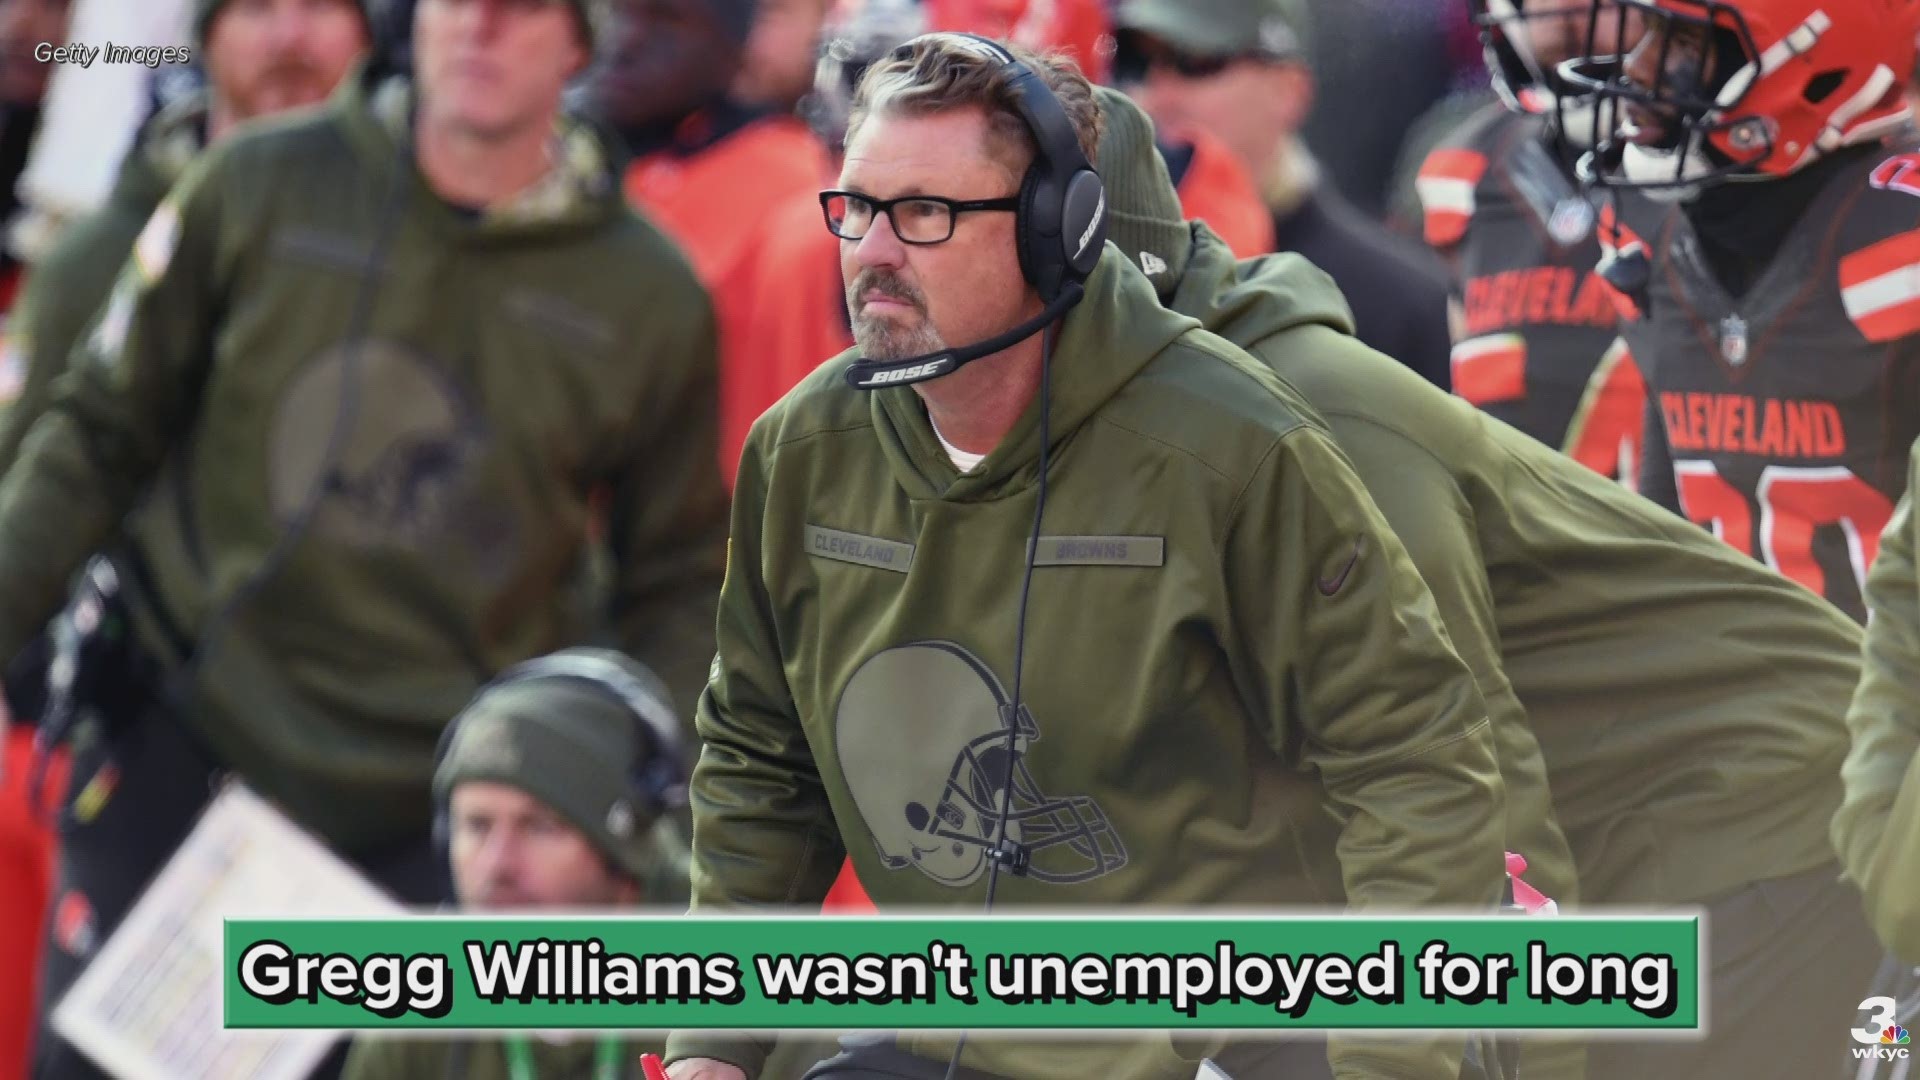 According to ESPN's Adam Schefter, the New York Jets are finalizing a deal to hire Gregg Williams as their new defensive coordinator.